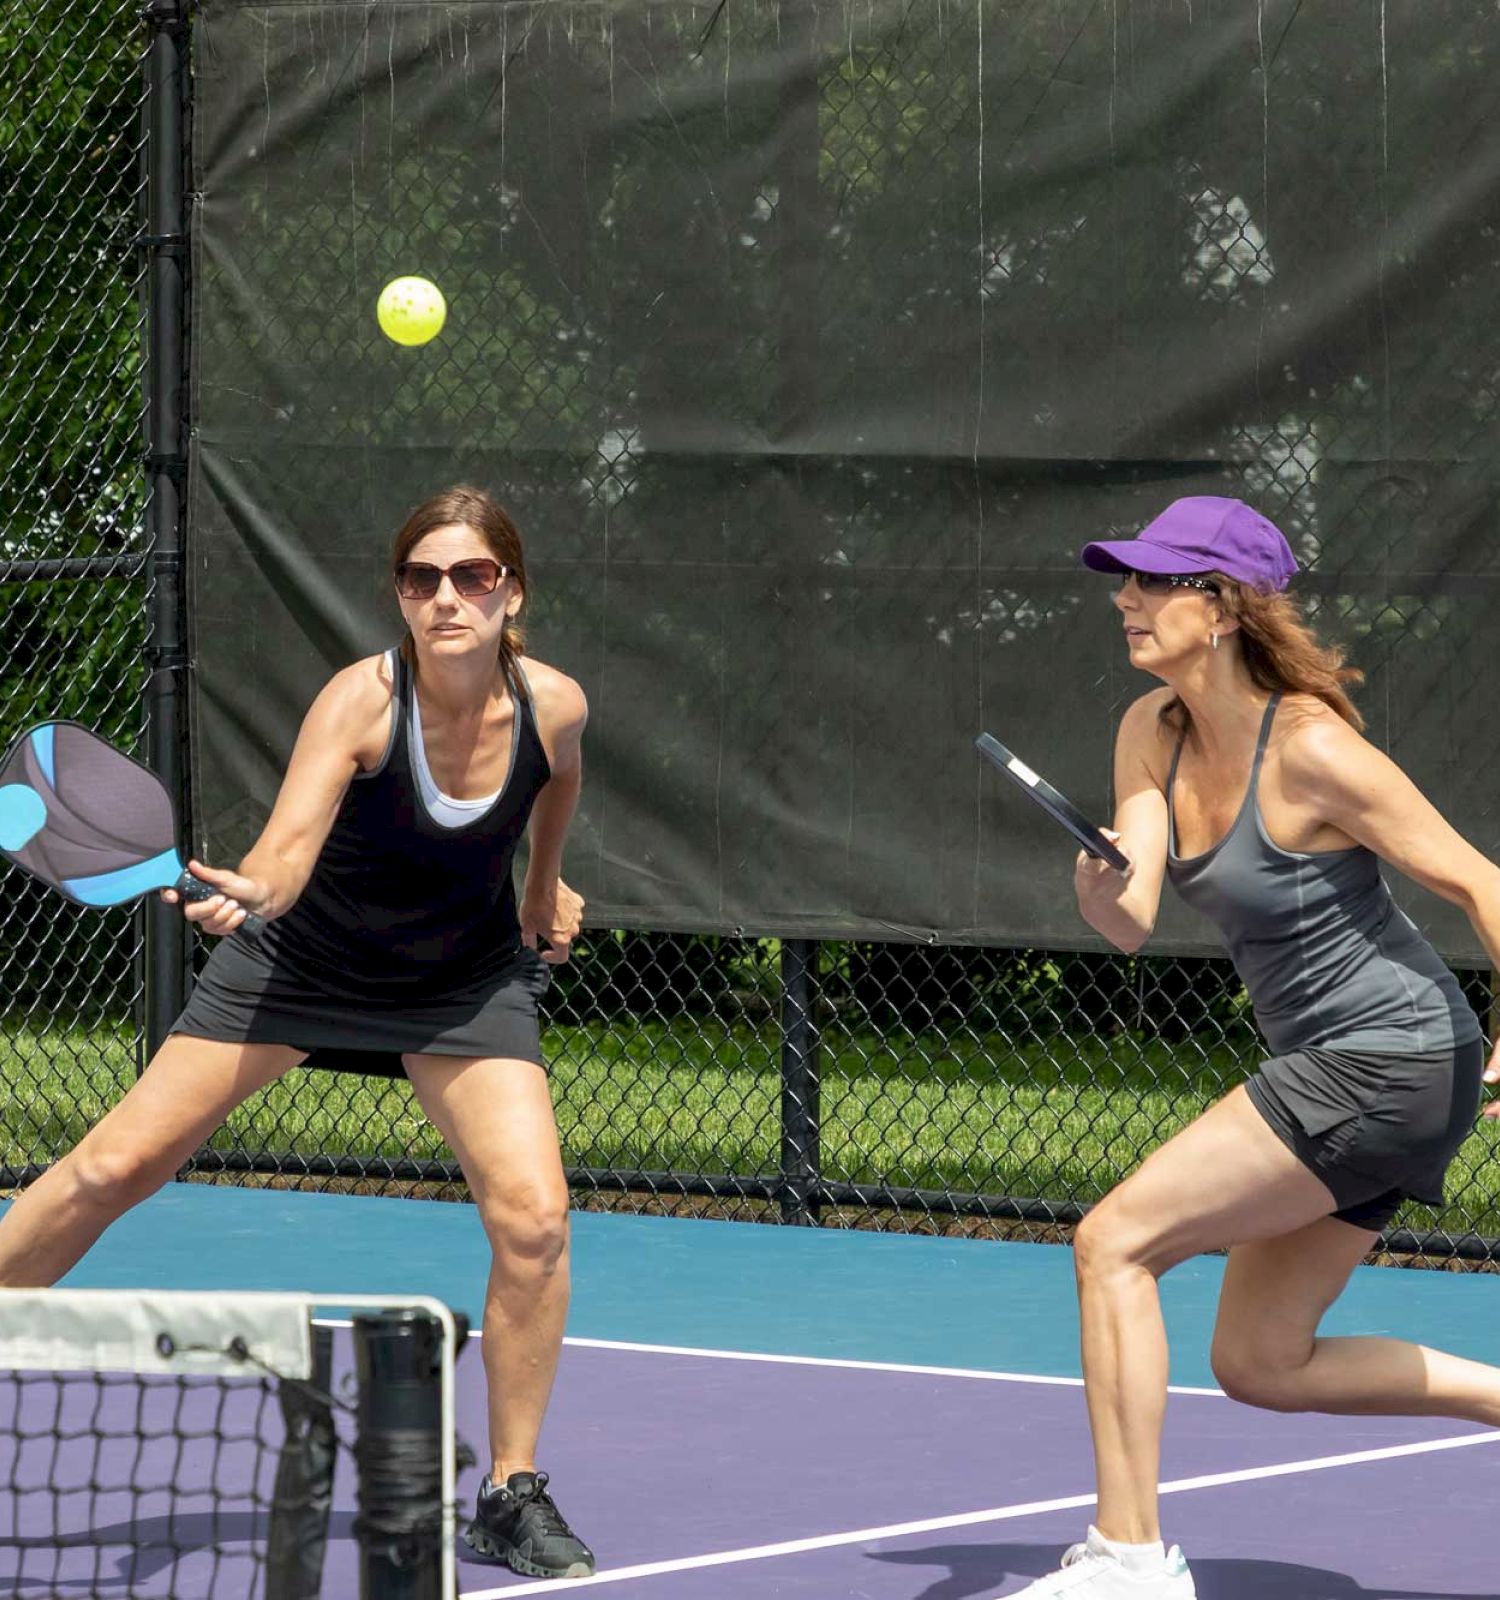 Two women are playing pickleball on an outdoor court; one is about to hit the ball with a paddle.